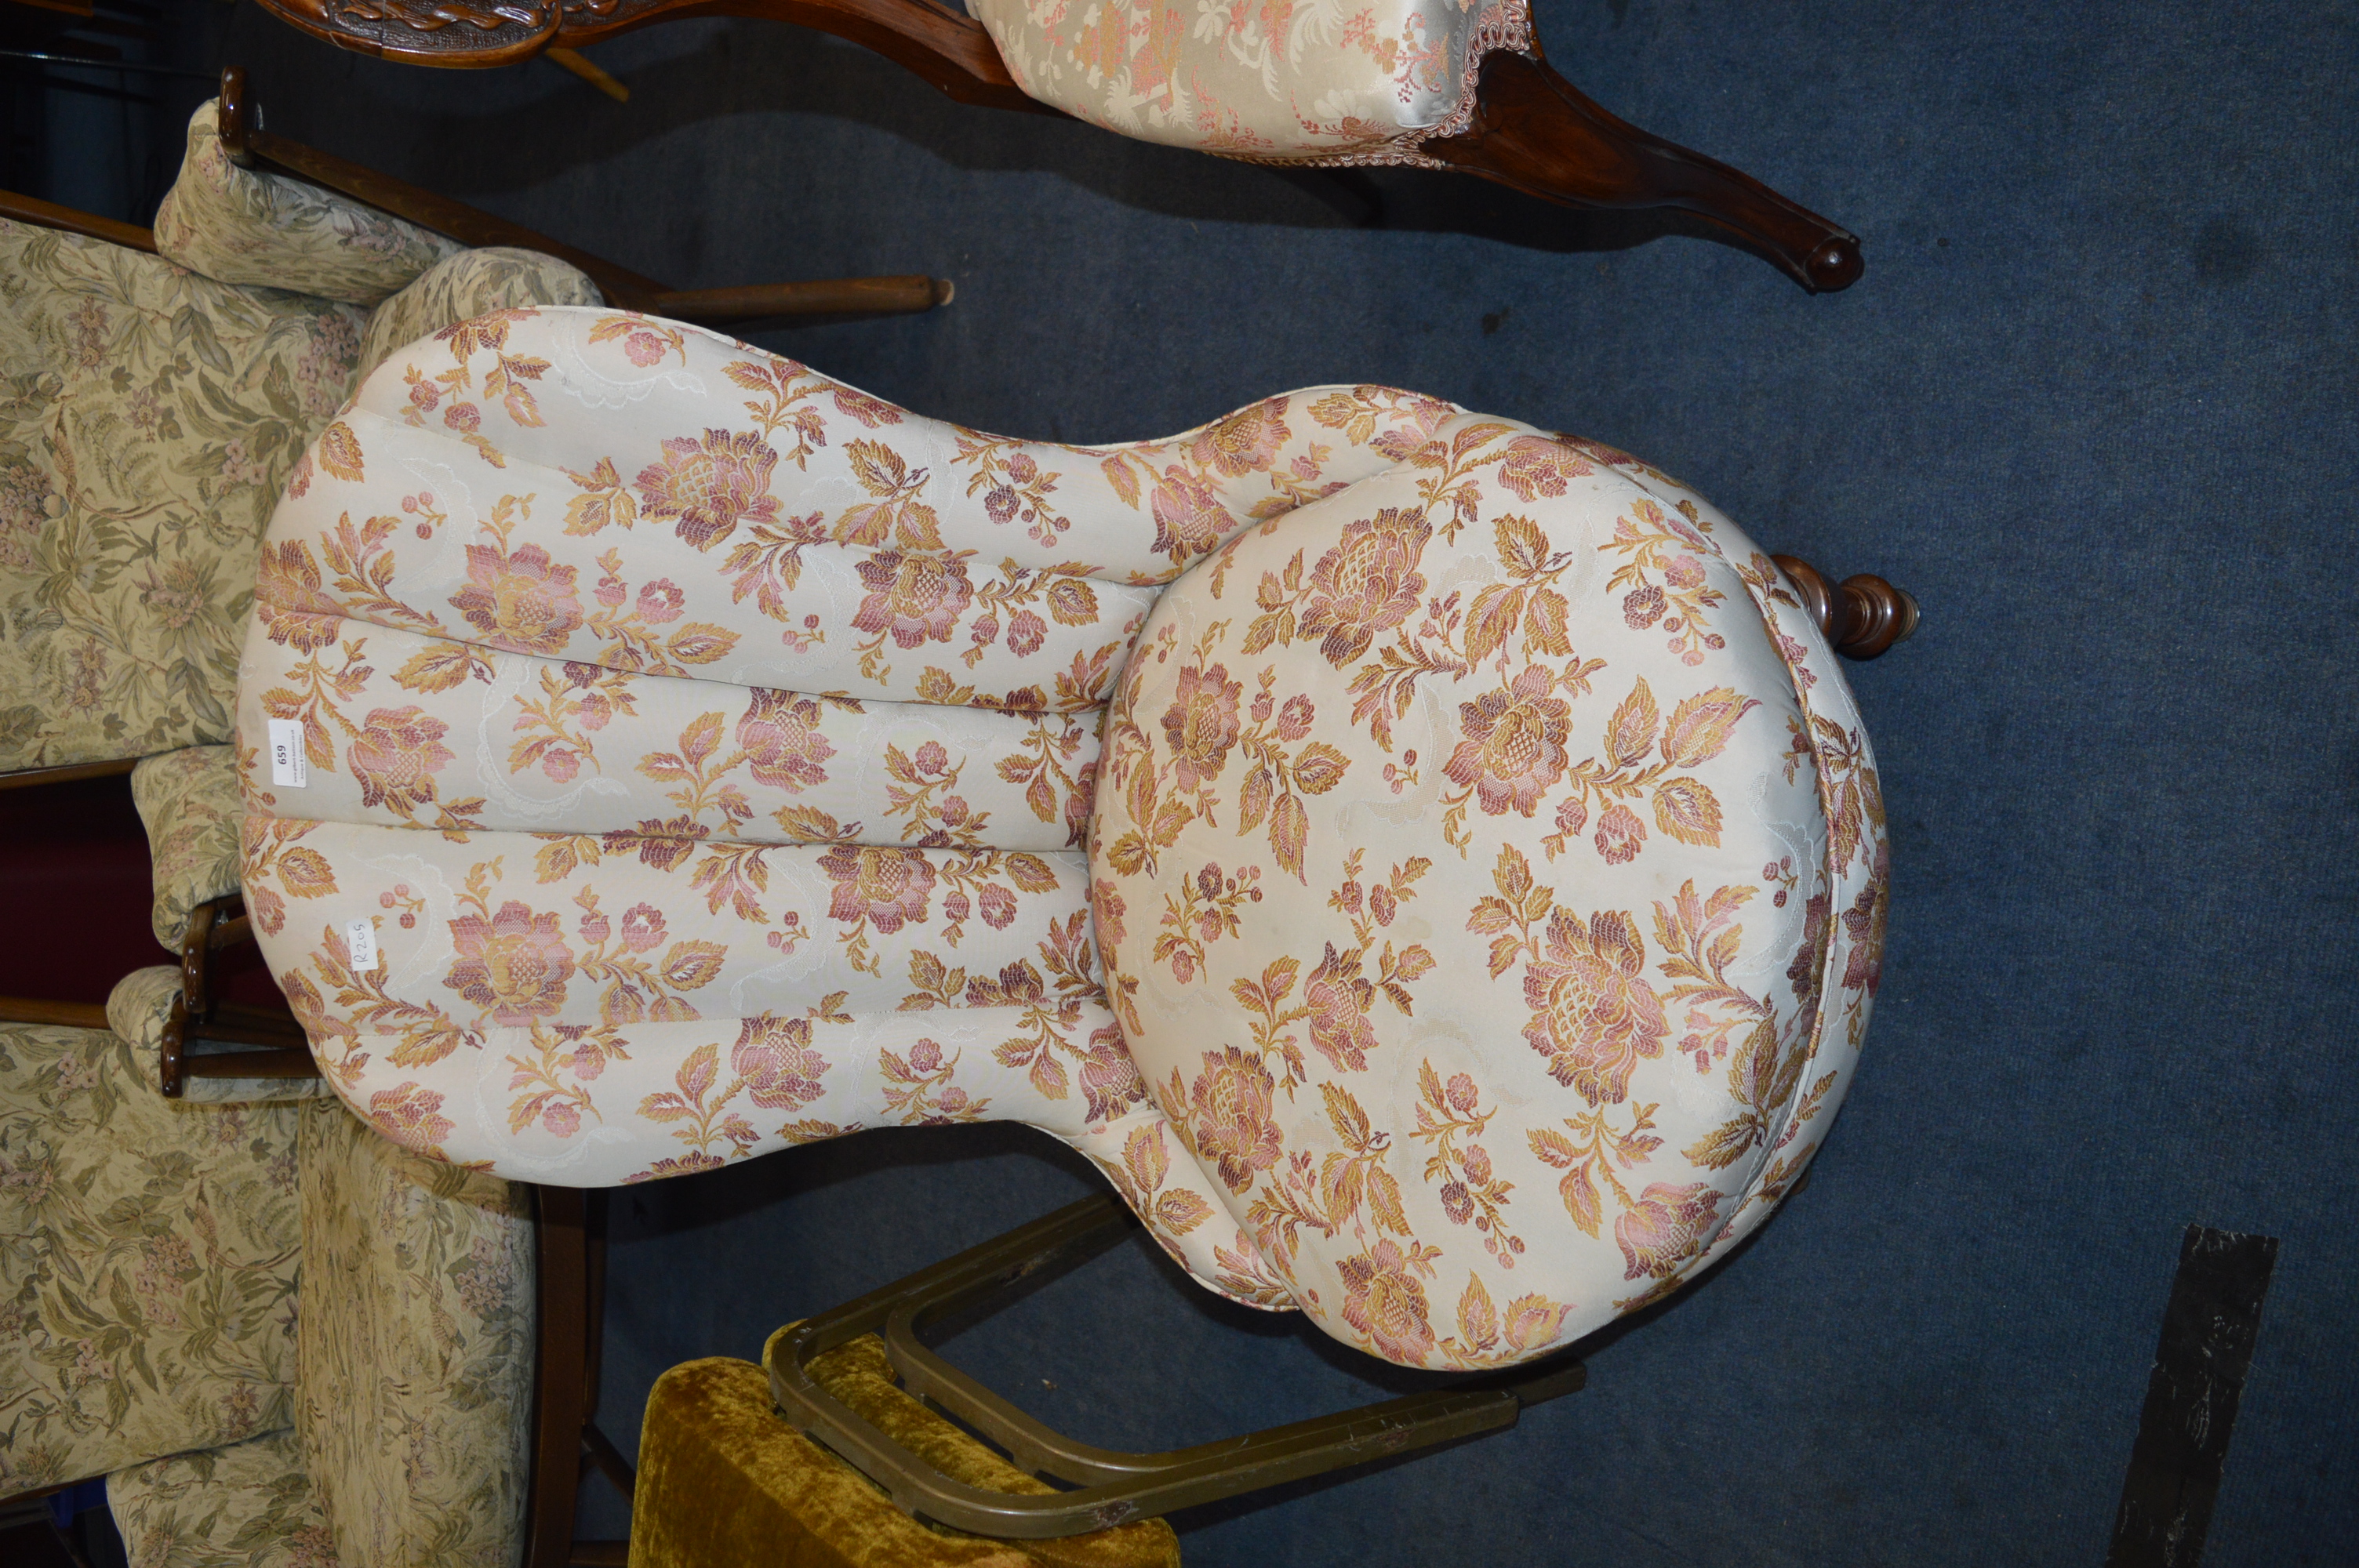 Victorian Nursing Chair with Floral Upholstery